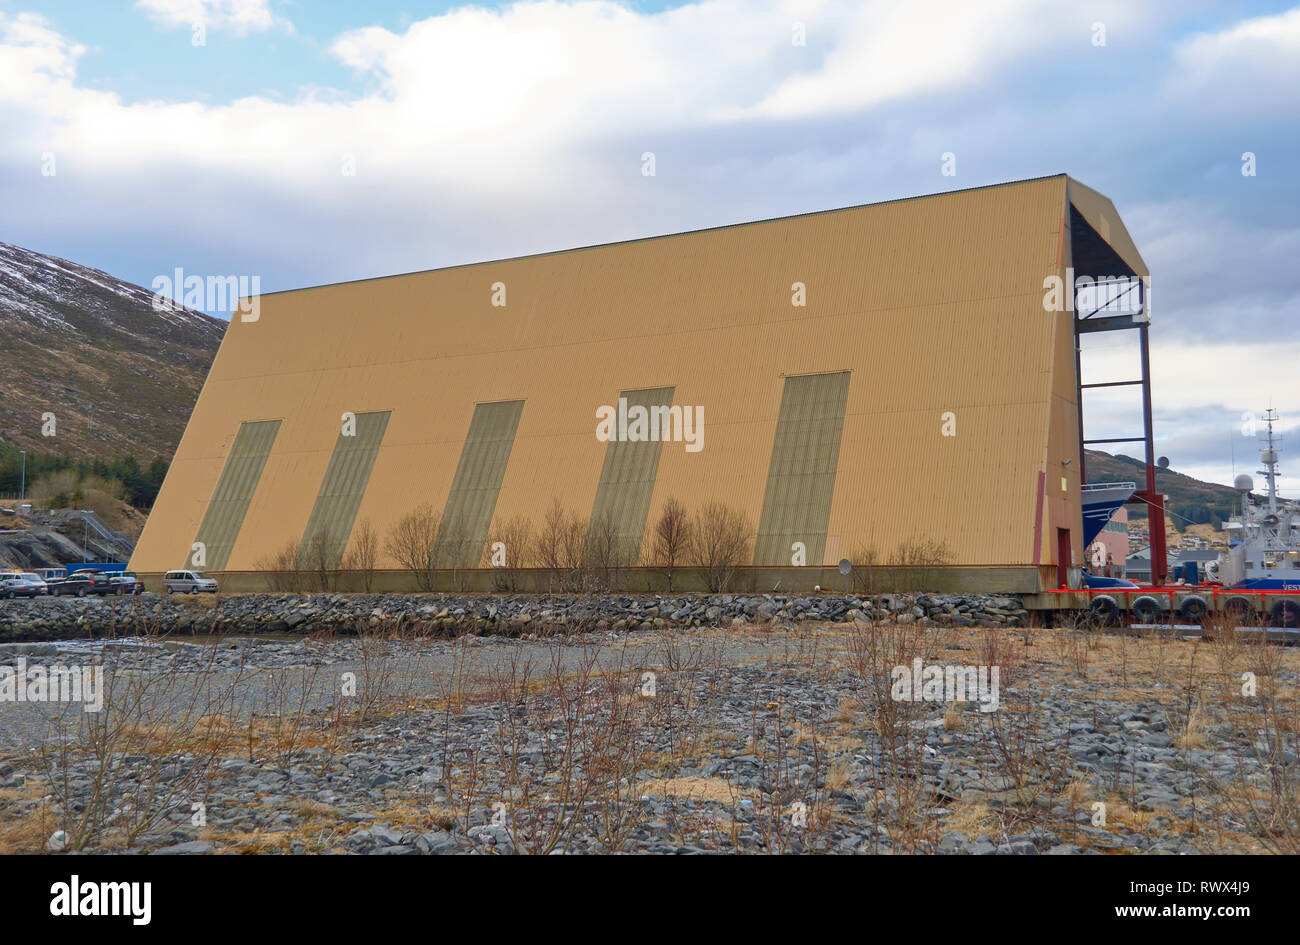 The Sea Hangar at the Batbygg Shipyard, that allows work to continue on Vessels in inclement weather conditions in Winter. Maloy, Norway. Stock Photo